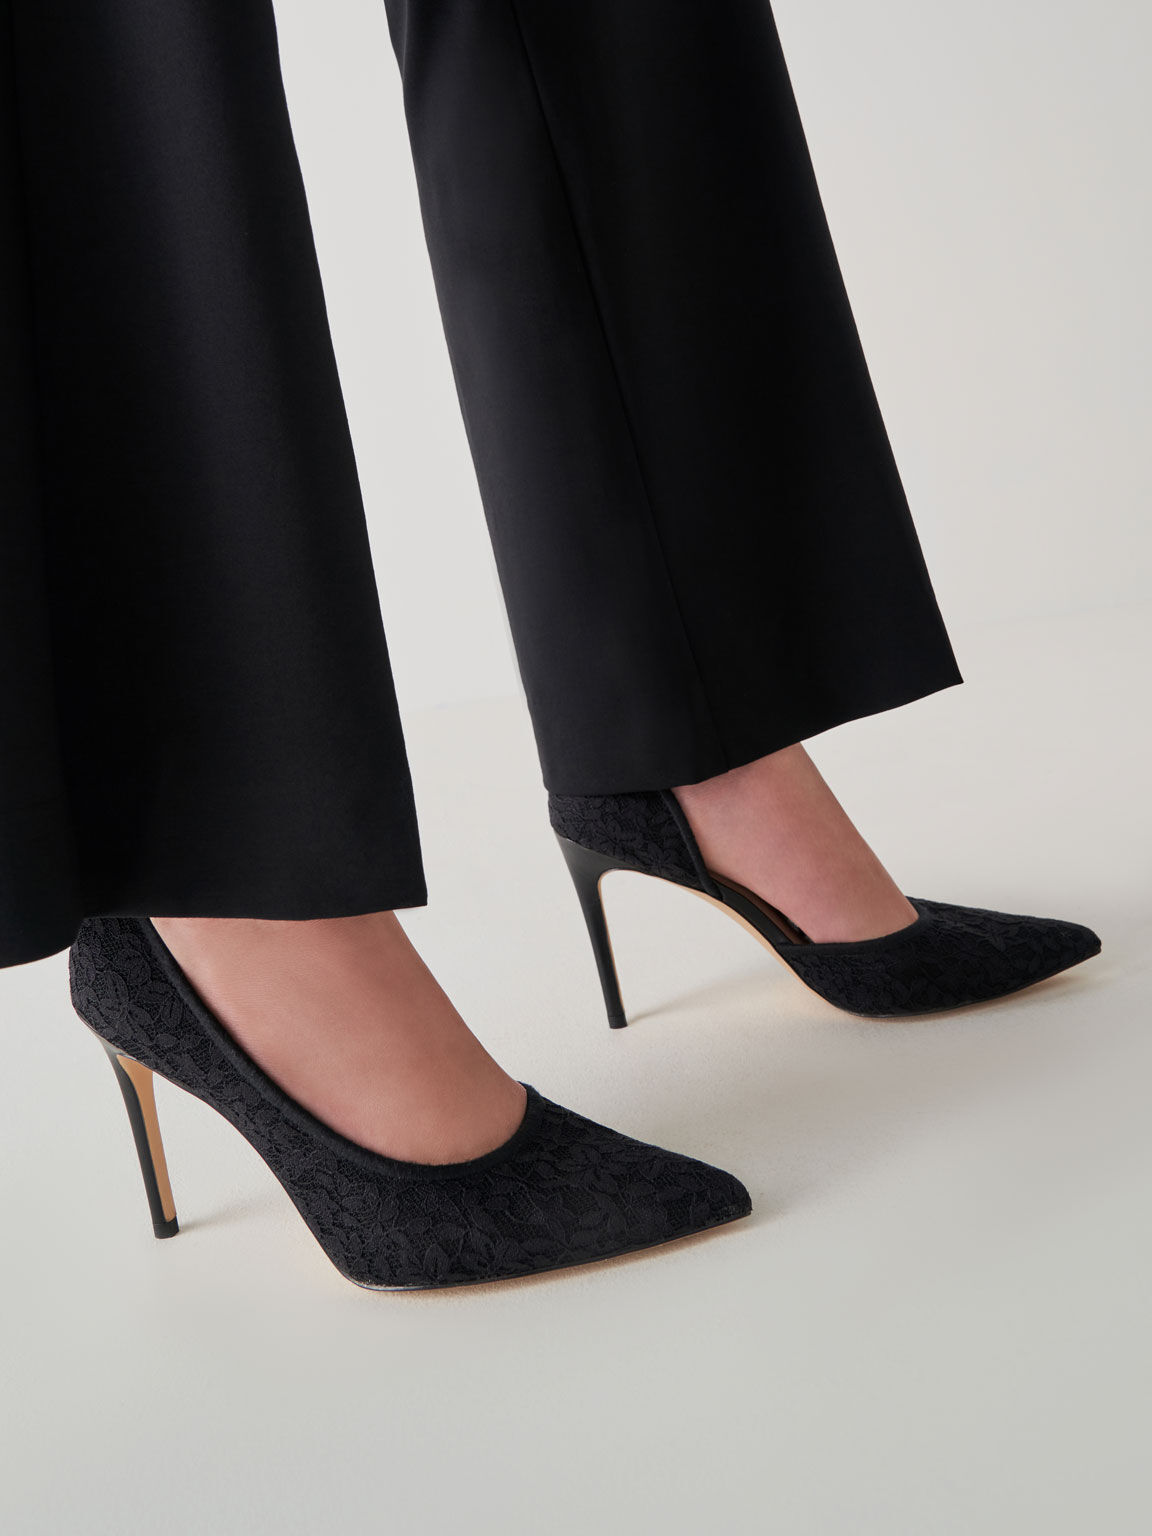 Women's Pumps | Shop Exclusive Styles - CHARLES & KEITH US